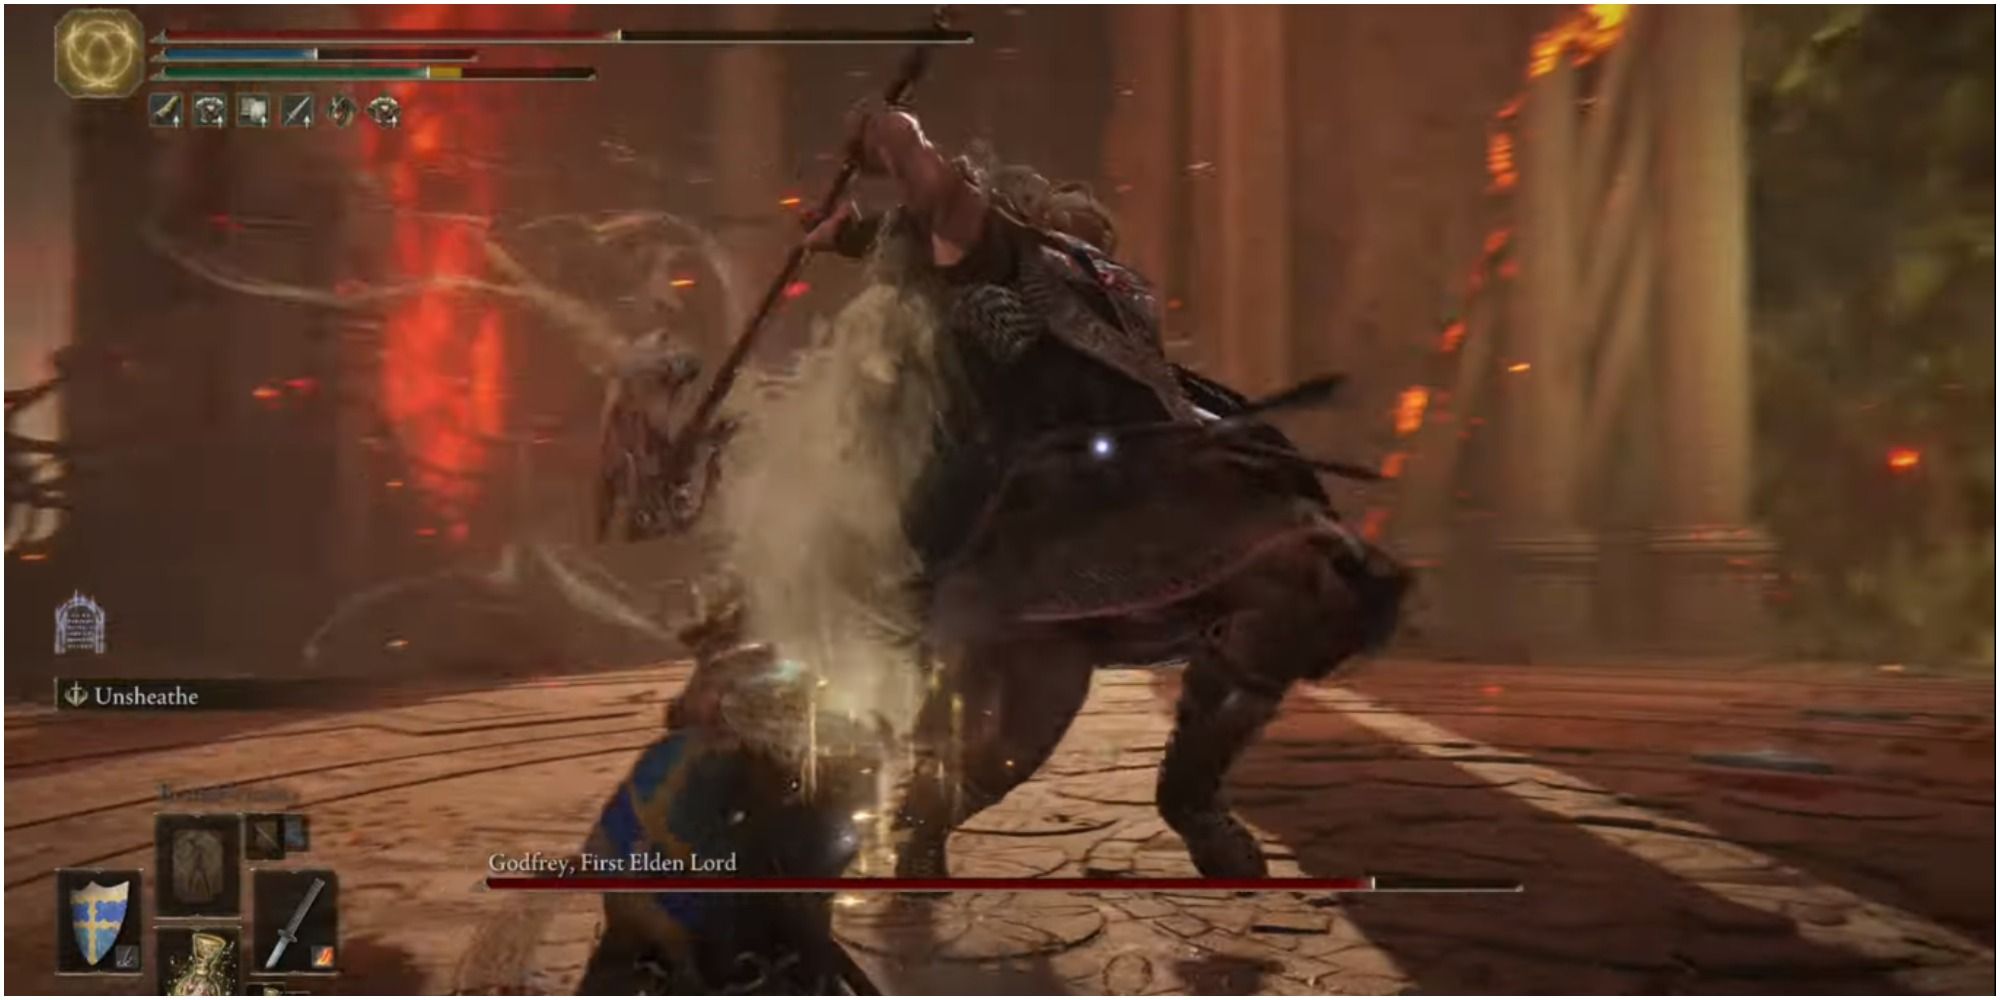 Godfrey spinning his axe above his head.